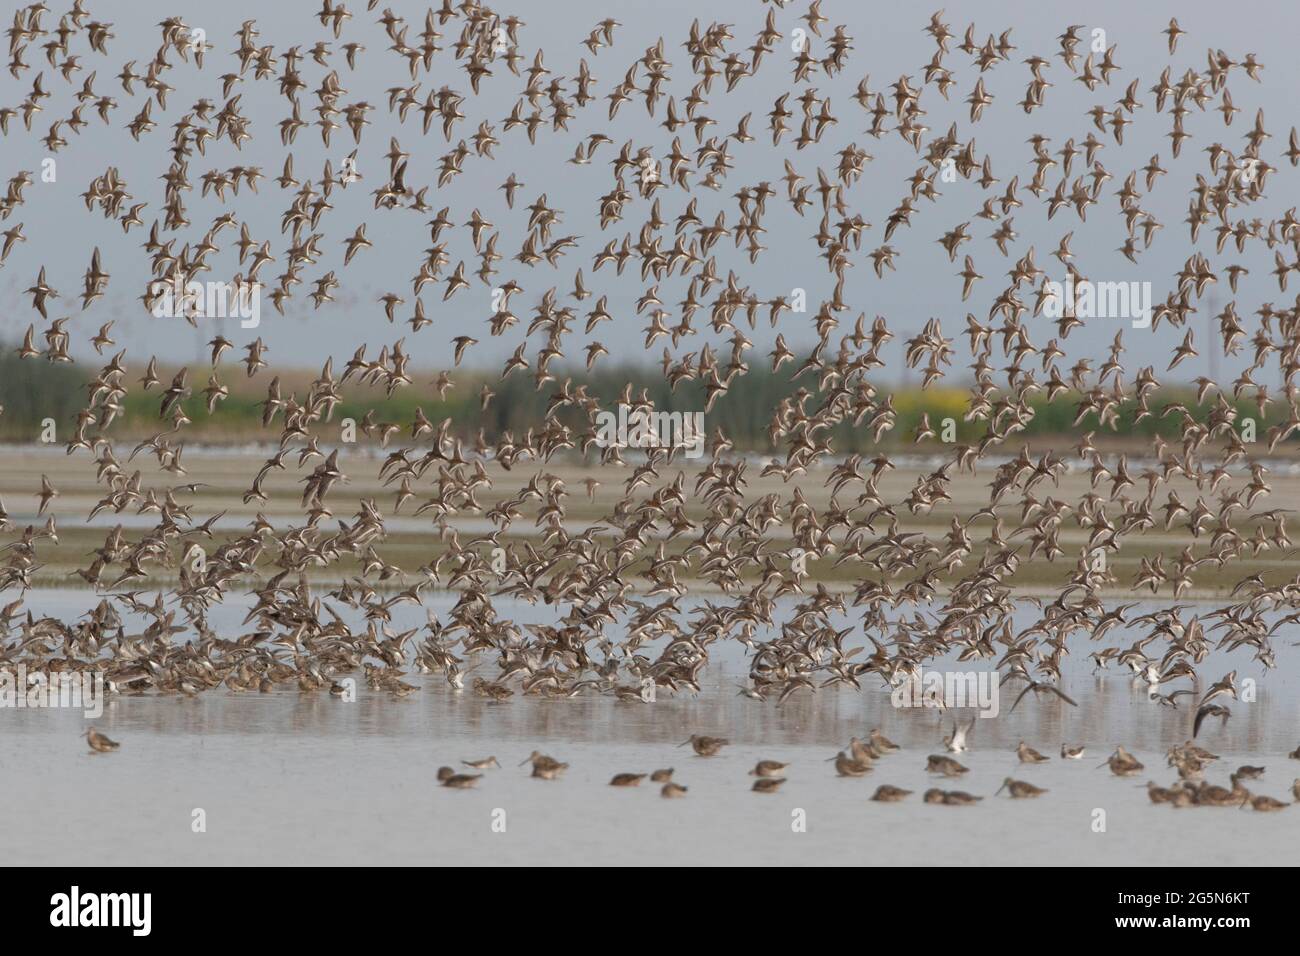 A large flock of Dunlins, Calidris alpina, in-flight over a shallow wetland during Spring migration at the Grasslands Ecological Area, Merced Co, CA. Stock Photo